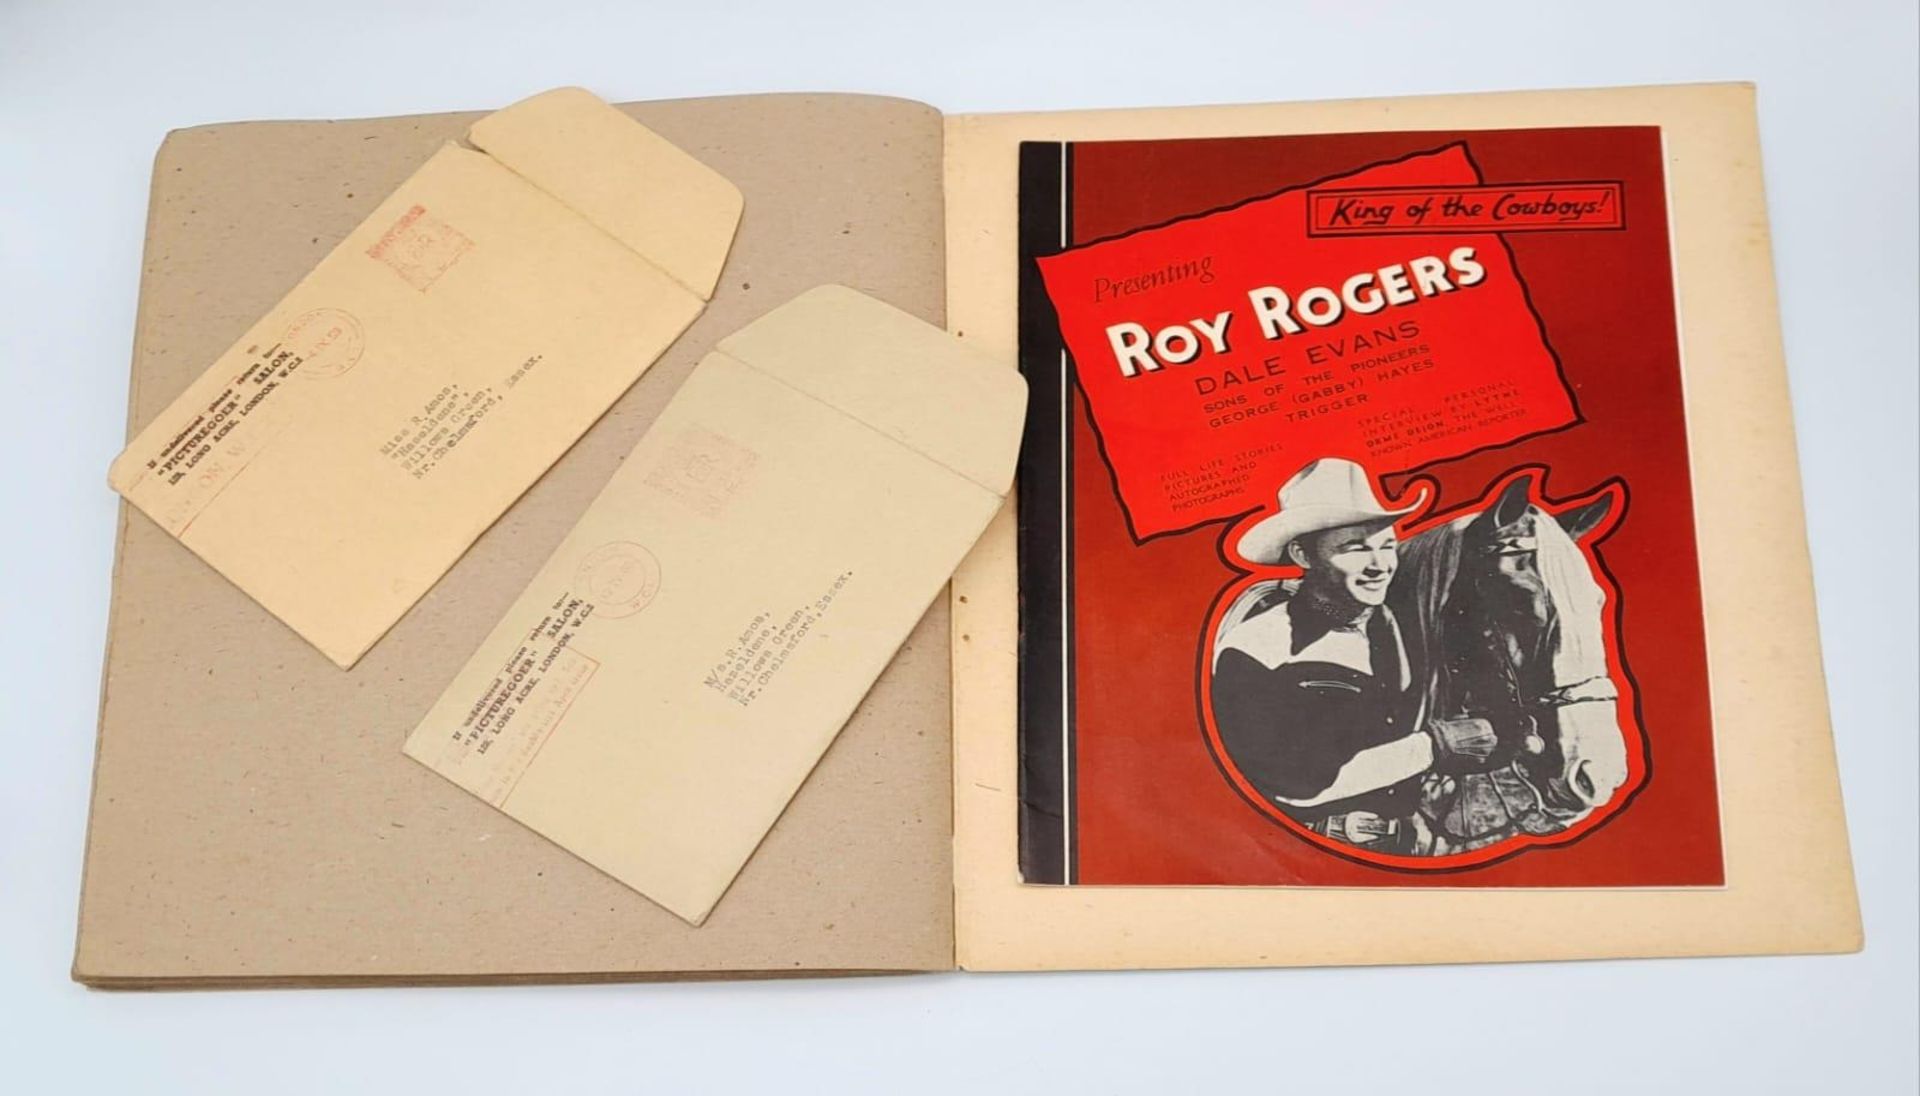 A Vintage Book of Hollywood Western Movie Stars From The 40s and 50s. Also includes fan